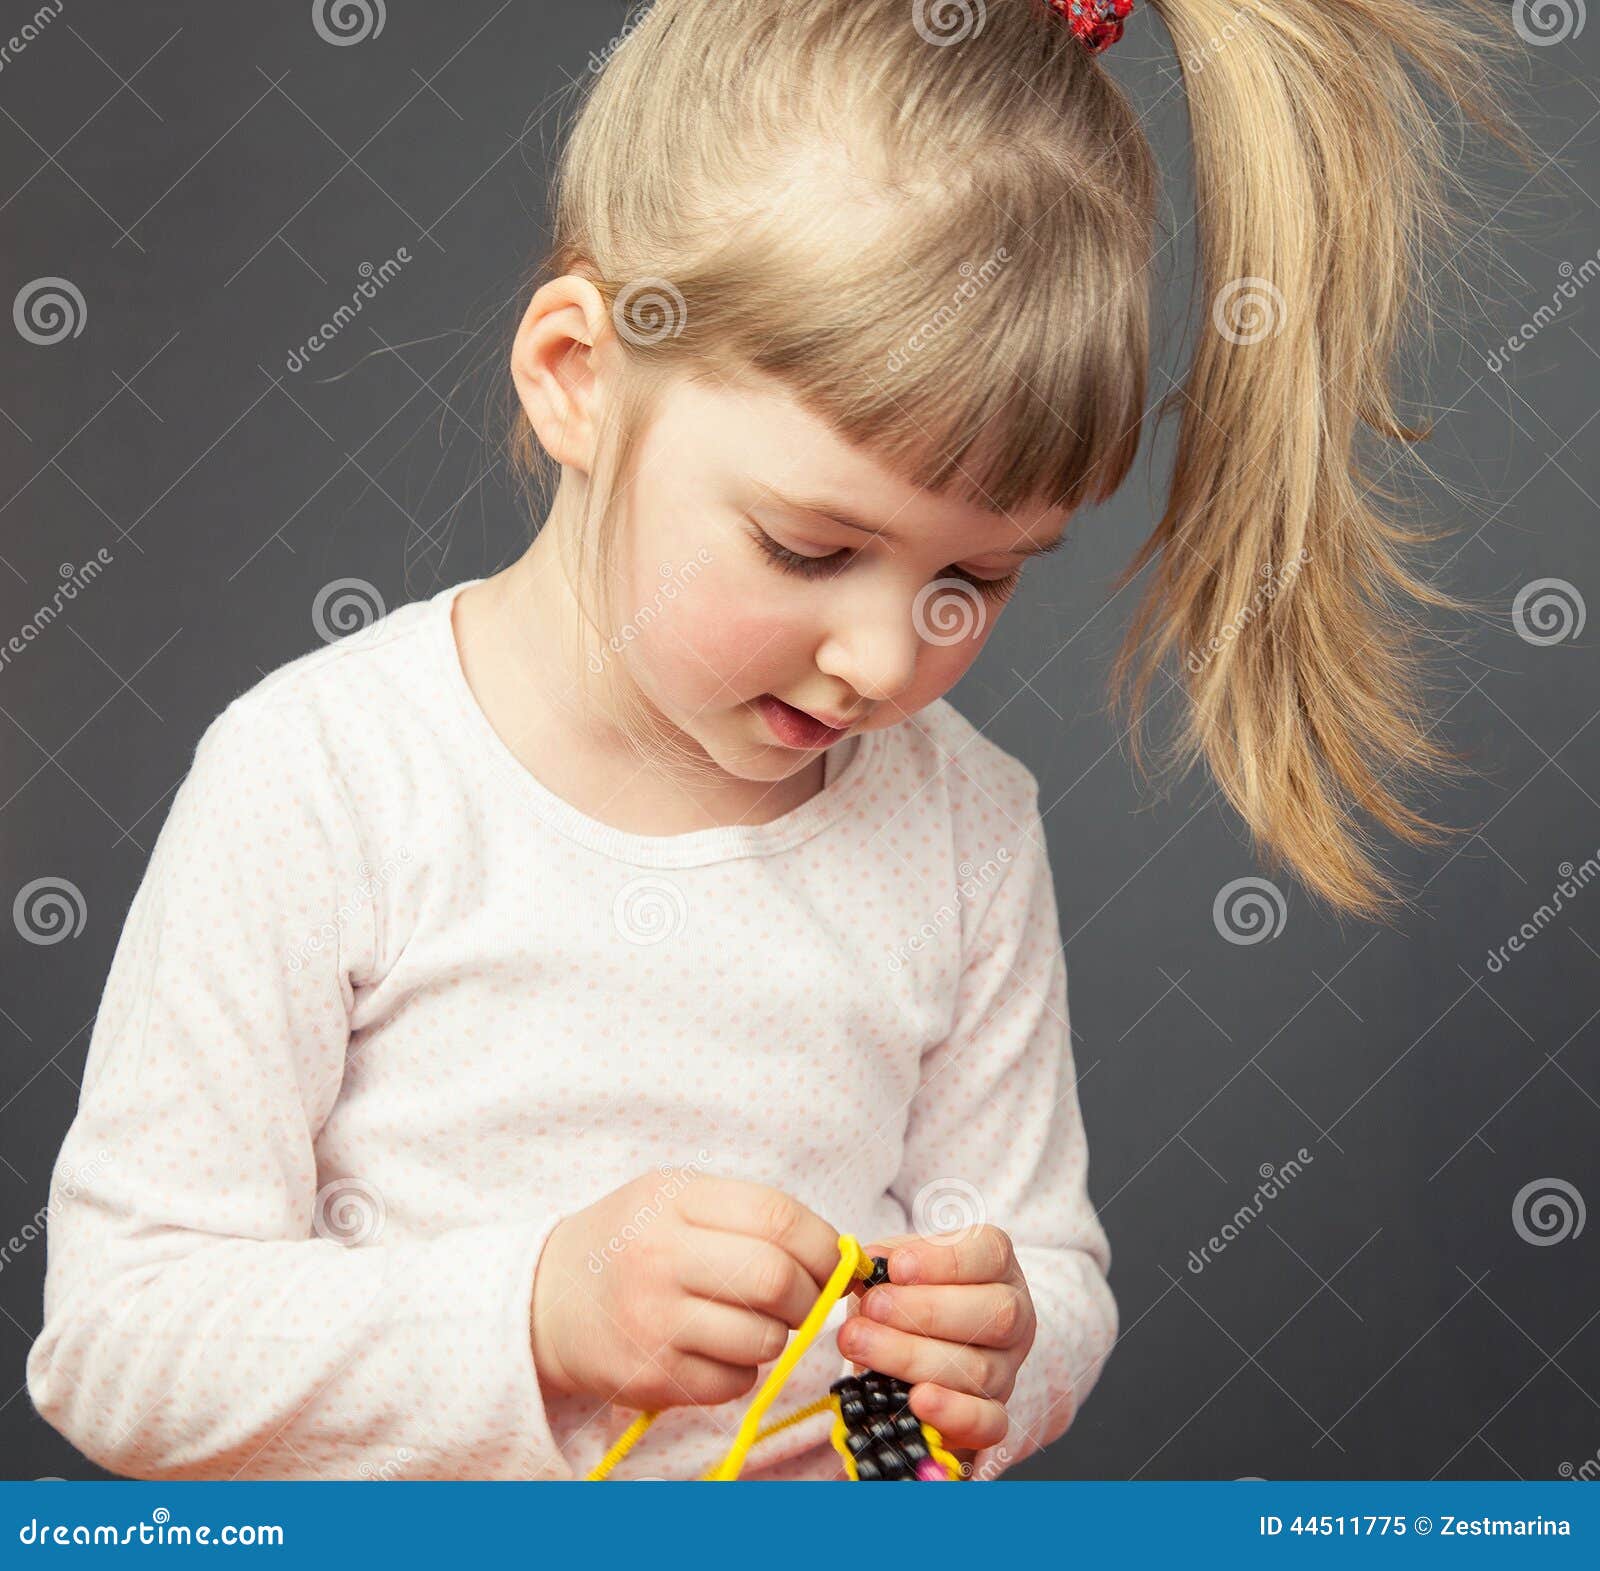 Pretty Little Girl Threading Beads on an Yellow Wire Stock Image ...